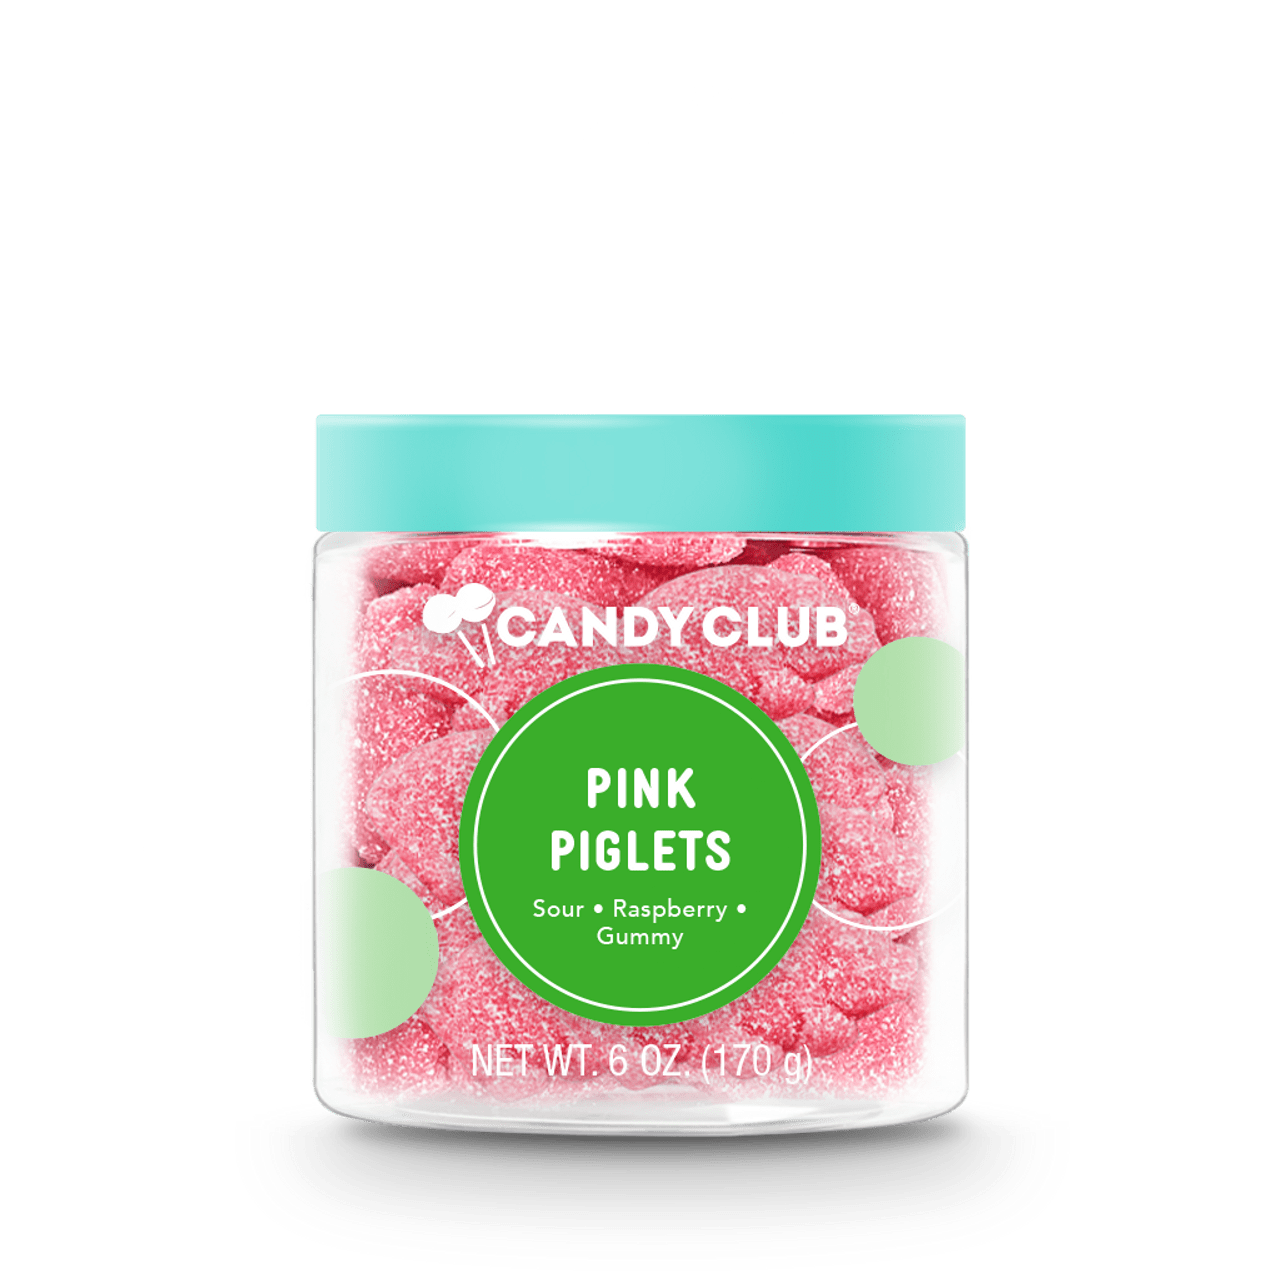 Candy Club Pink Piglets - Select these sweet-tart gummy piggies to taste!  Please refer to the photos regarding allergies and ingredients.